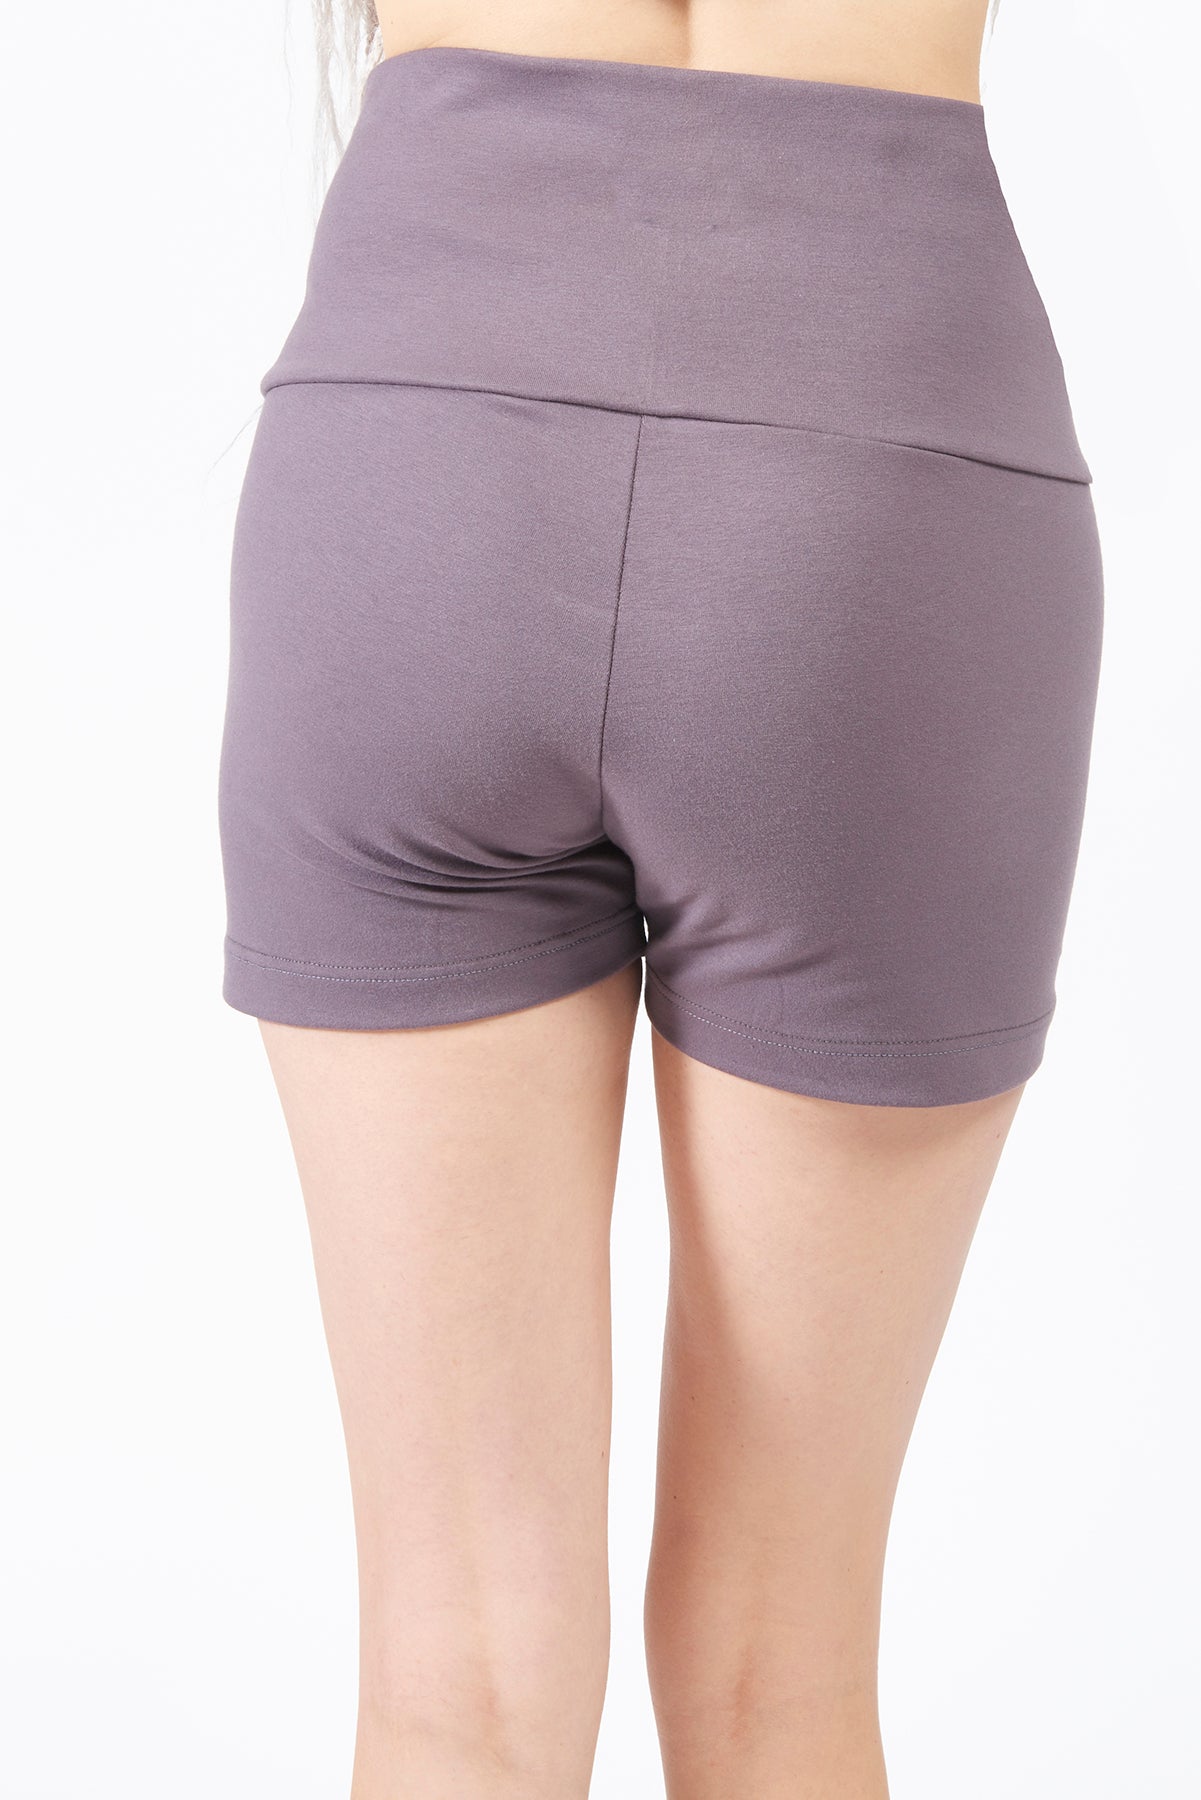 High Waisted Shorts - FOAT